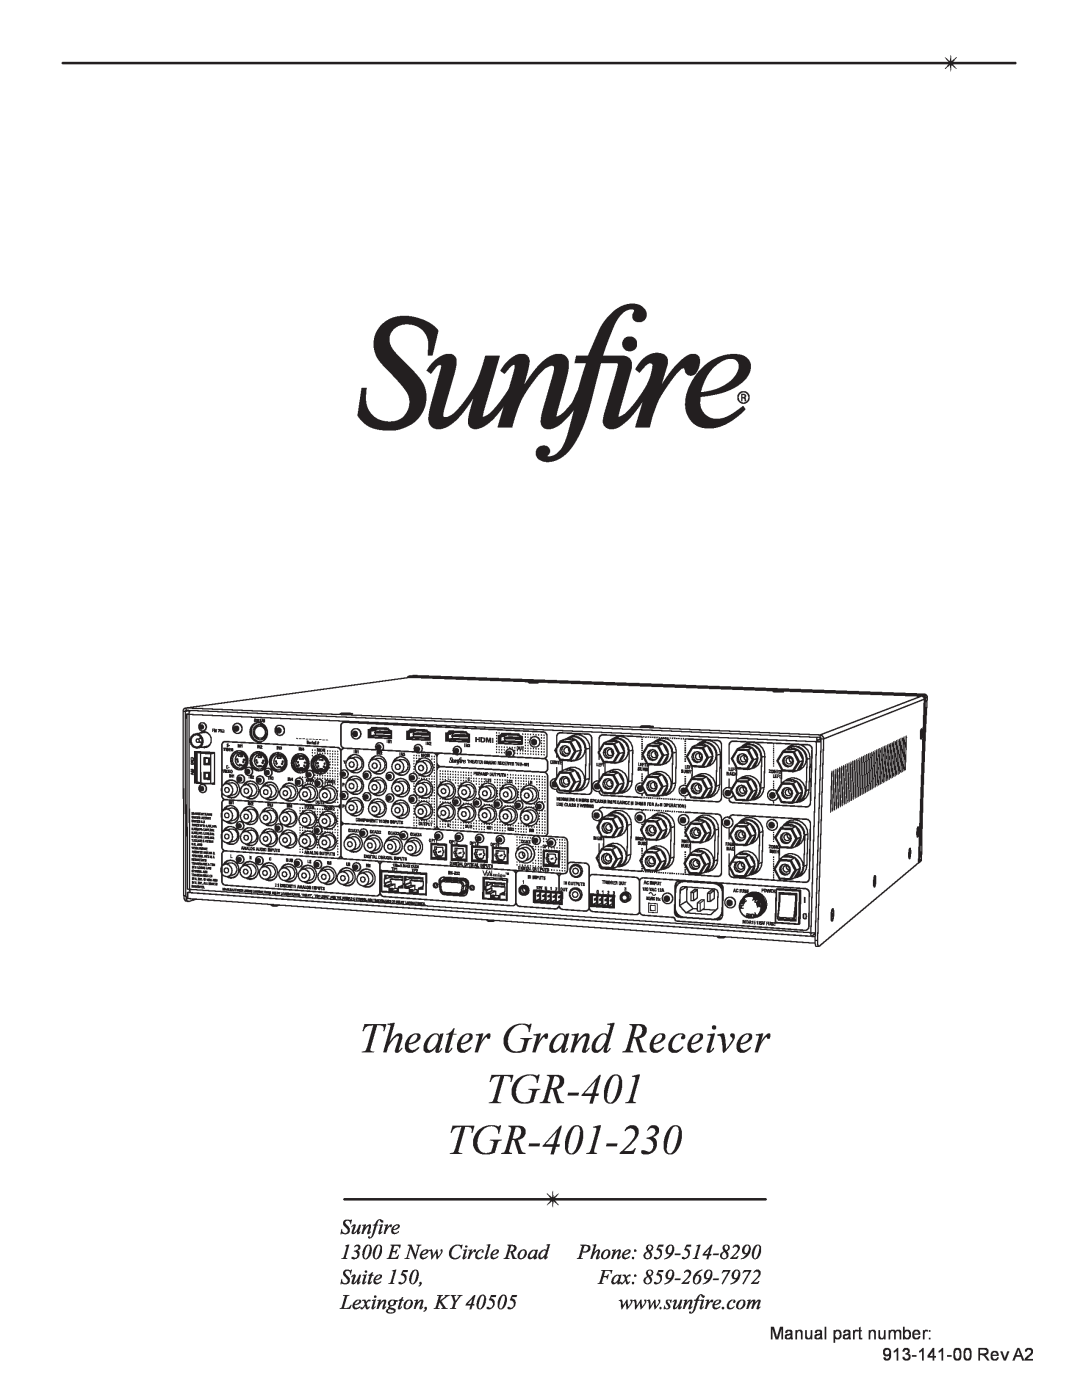 Sunfire manual Theater Grand Receiver TGR-401 TGR-401-230, Manual part number 913-141-00Rev A2 